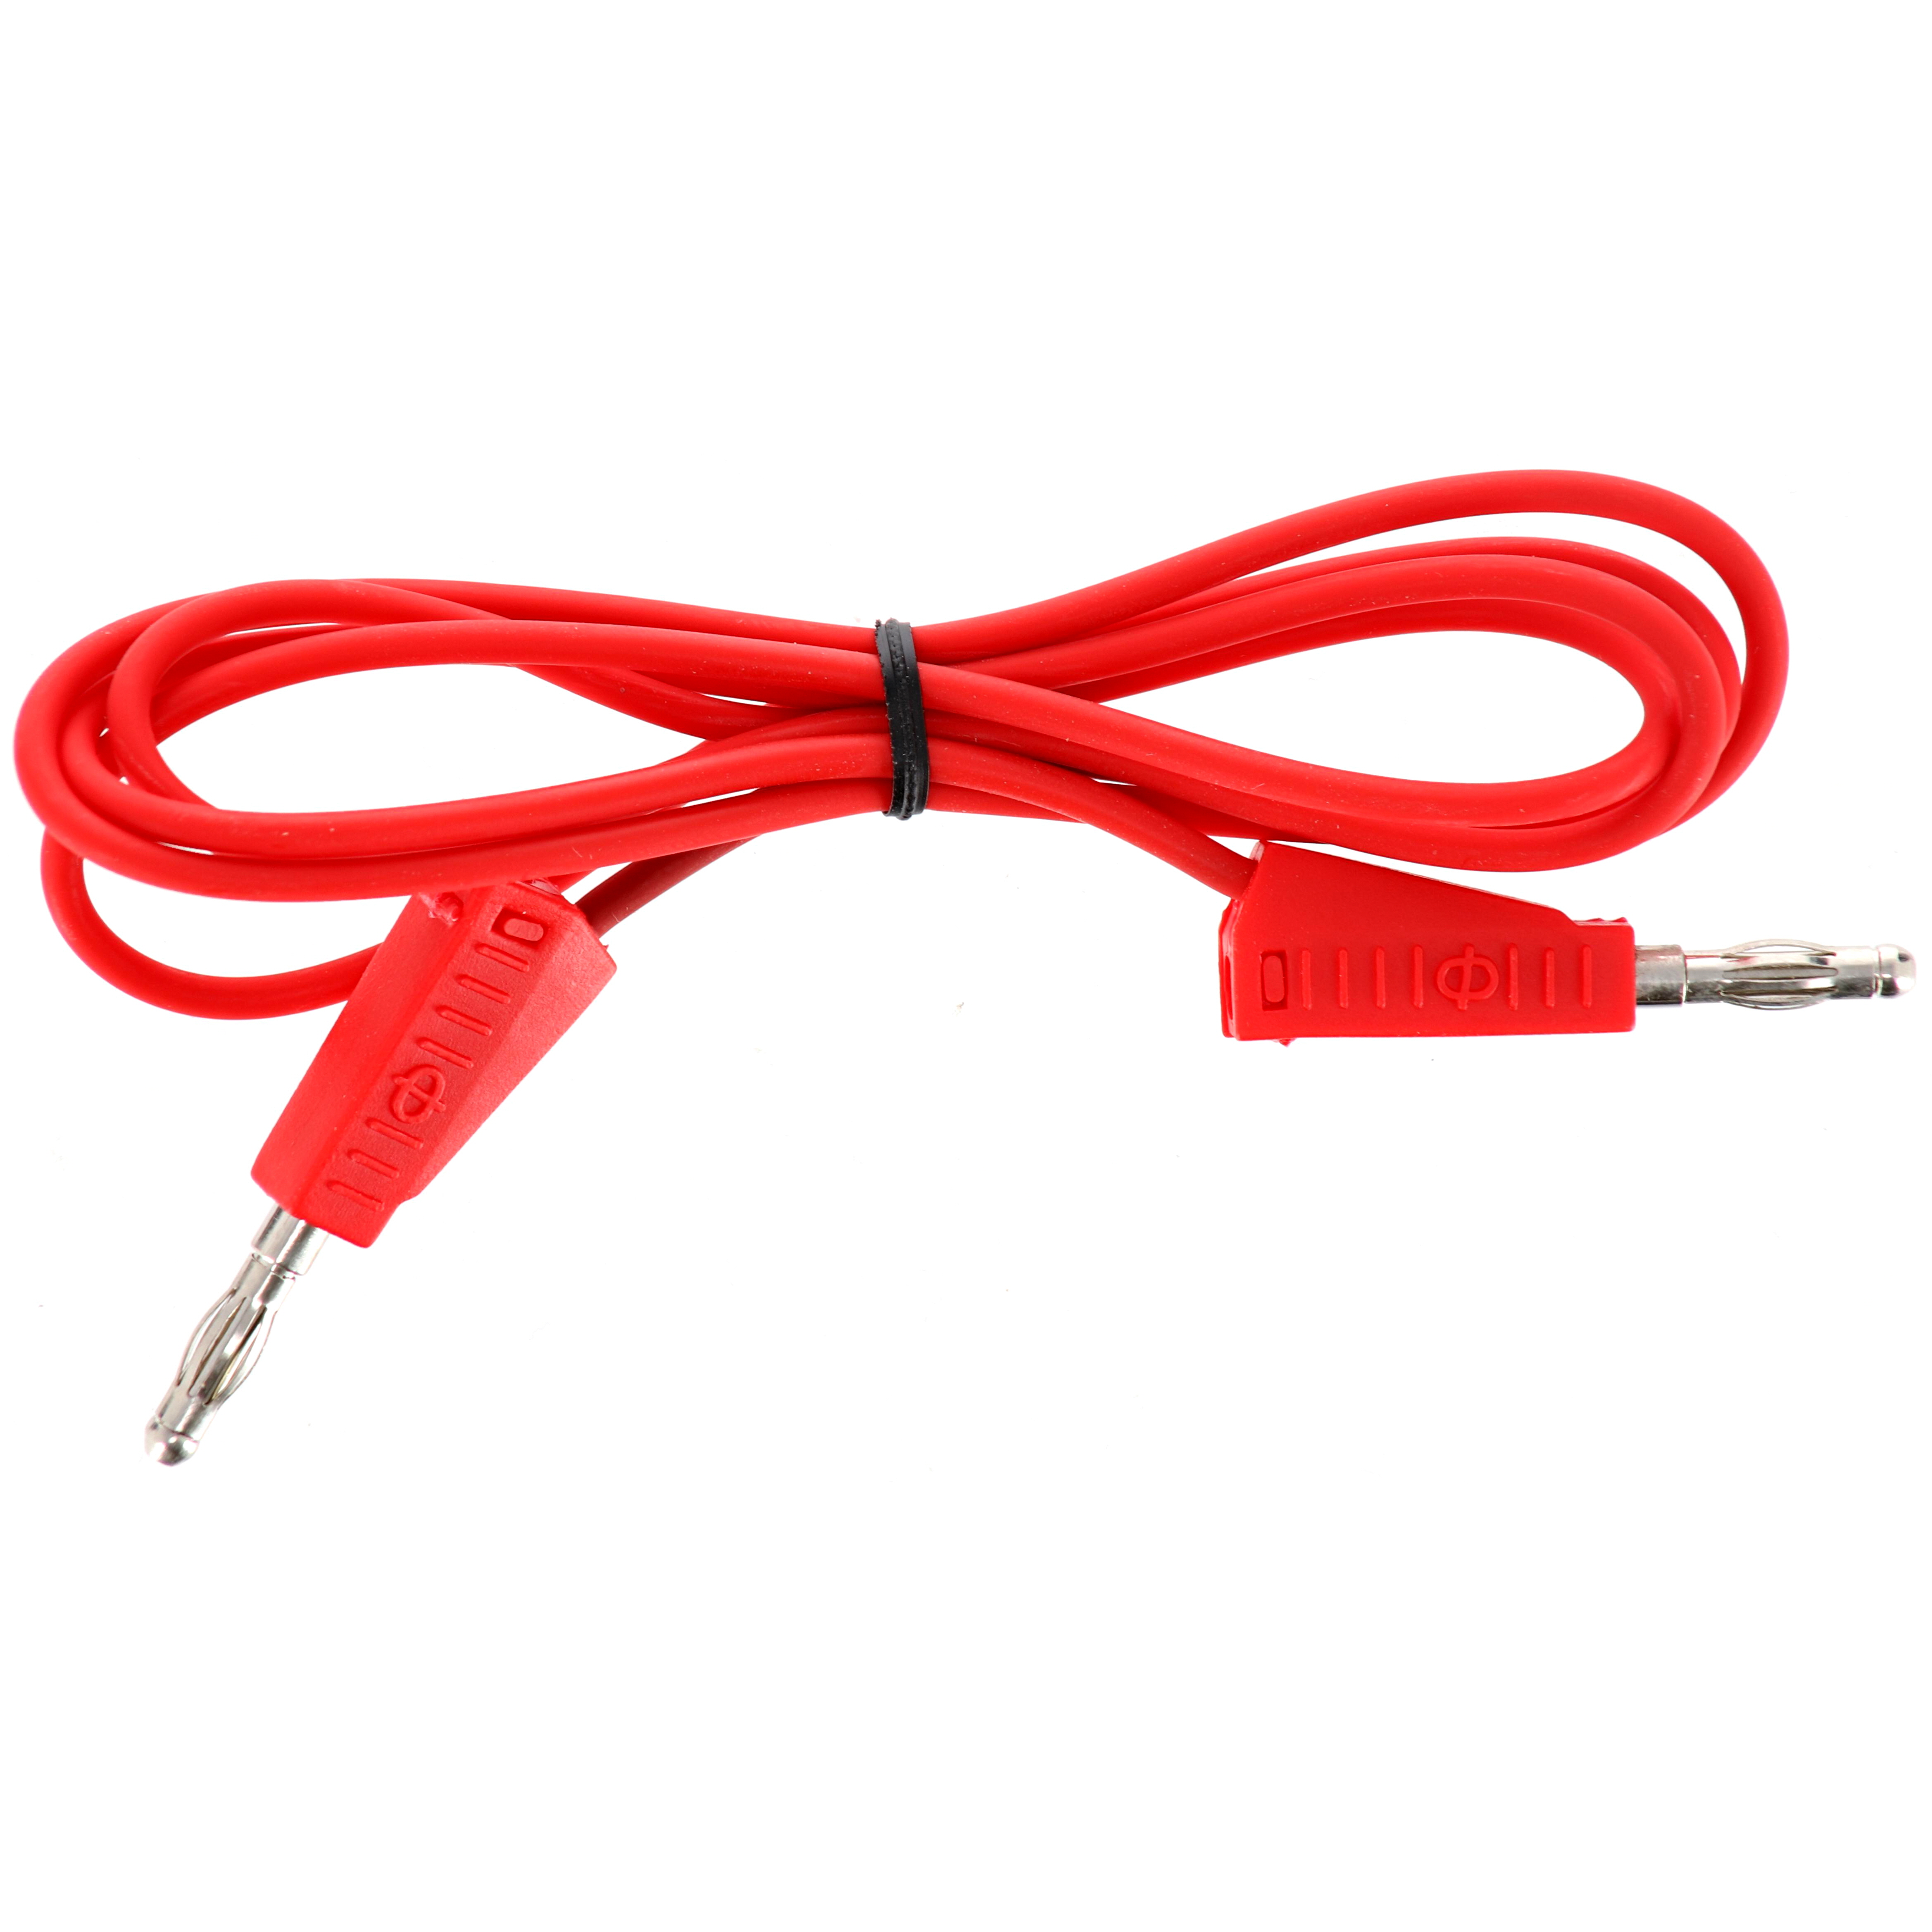 4mm Stackable Plug Lead 1000mm - Red